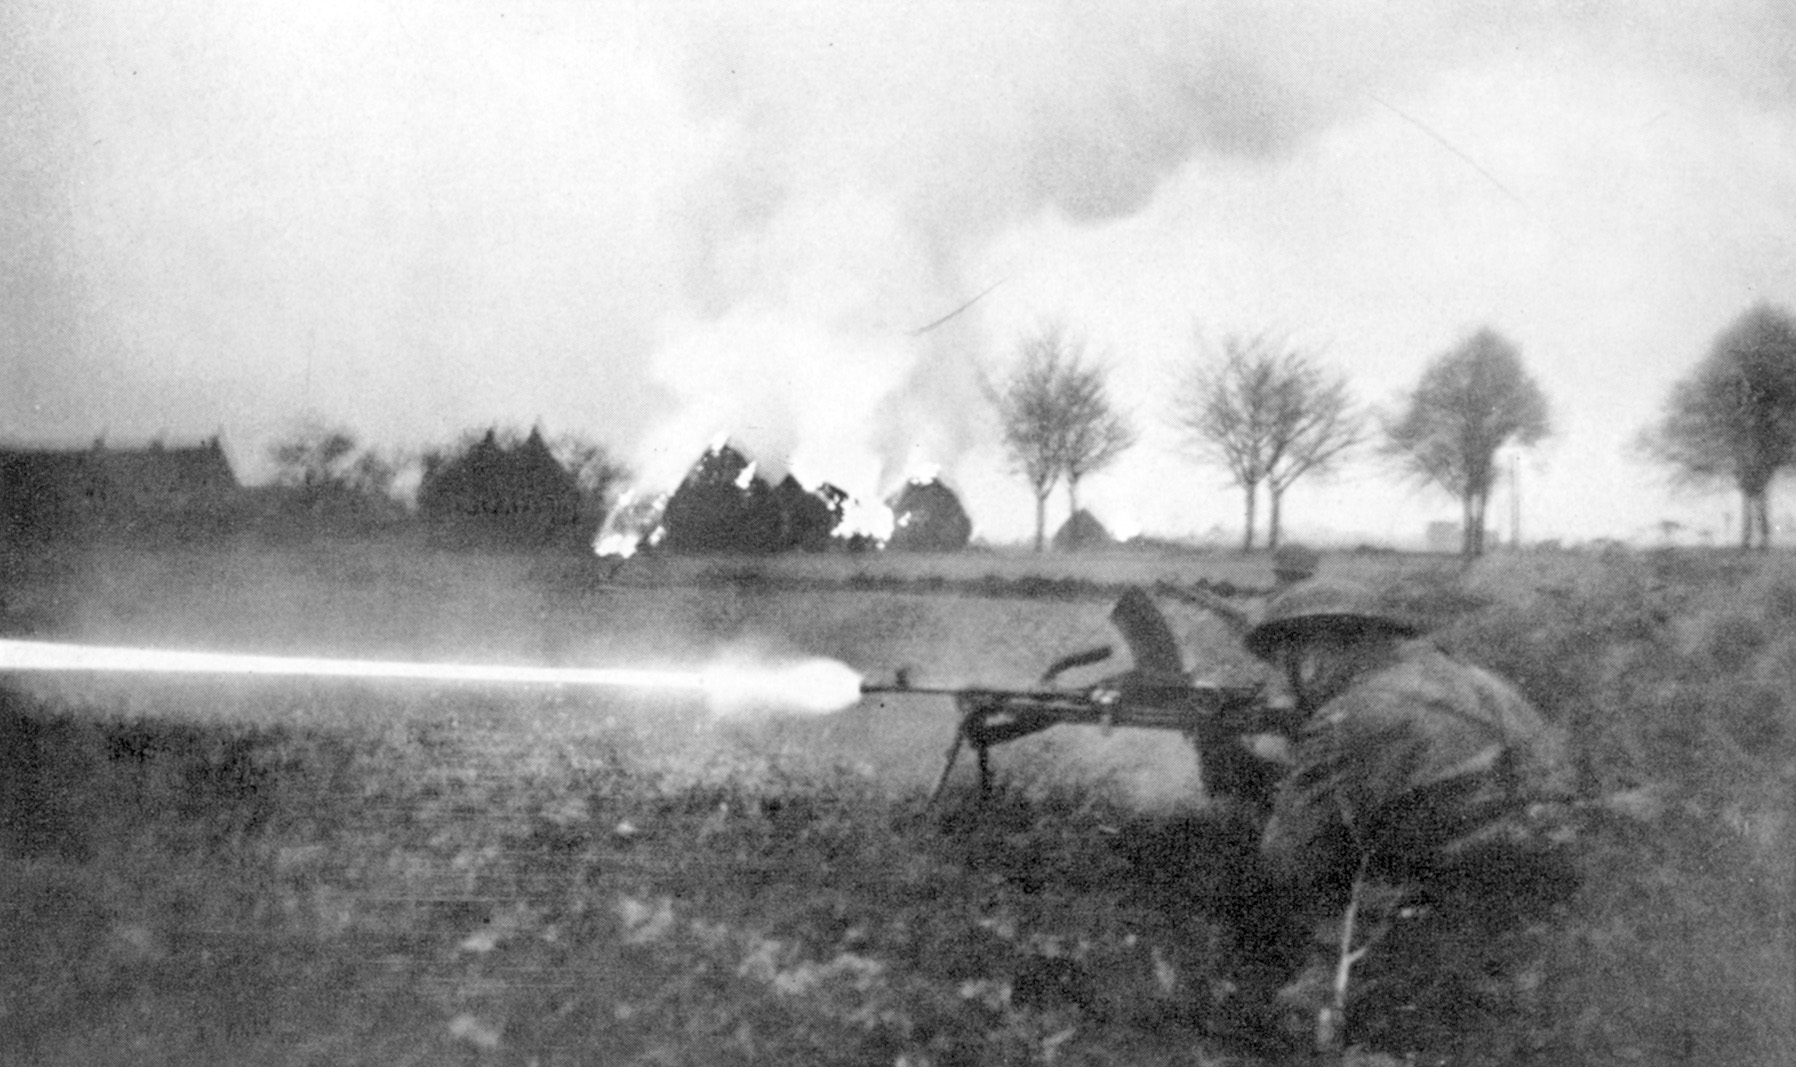 A British soldier fires a Bren gun in an open field near Arnhem as haystacks blaze in the background. Less than 2,000 members of the British 1st Airborne Division escaped capture or death during Operation Market-Garden. Relief forces failed to arrive in time to secure the bridge across the Lower Rhine.